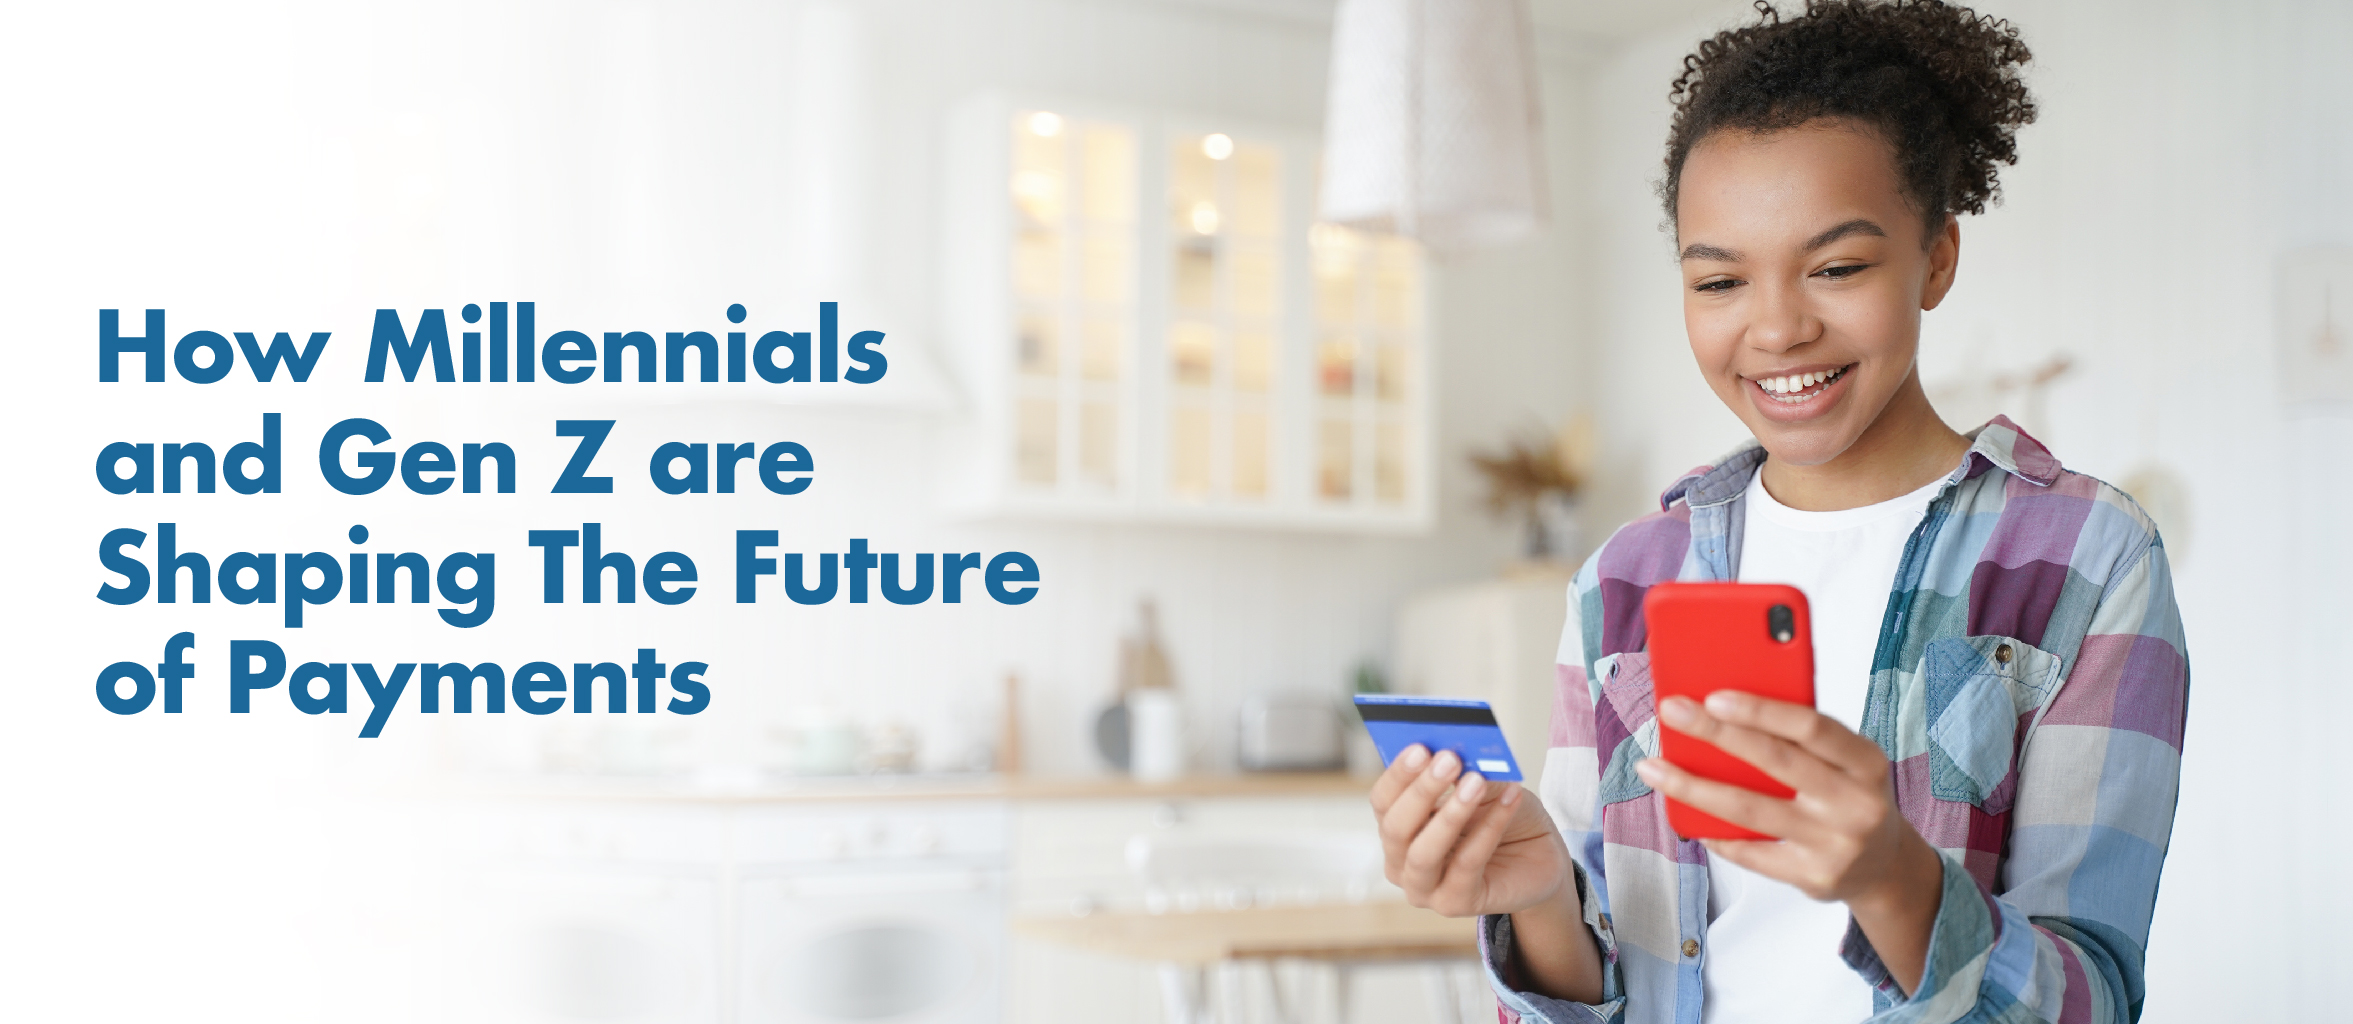 How Millennials and Gen Z are shaping the future of payments